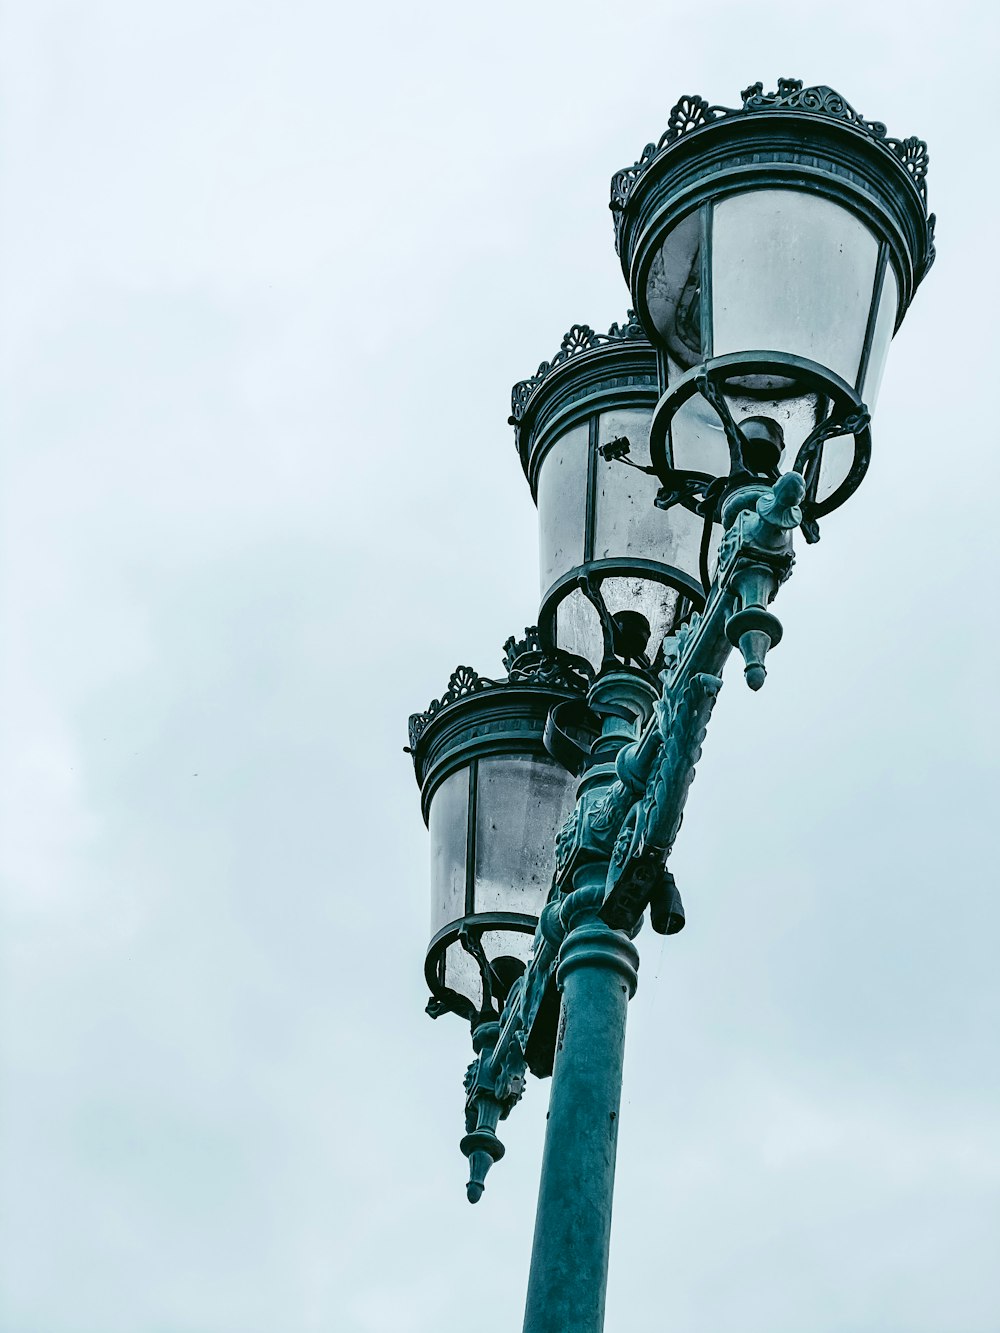 a lamp post with two lights attached to it